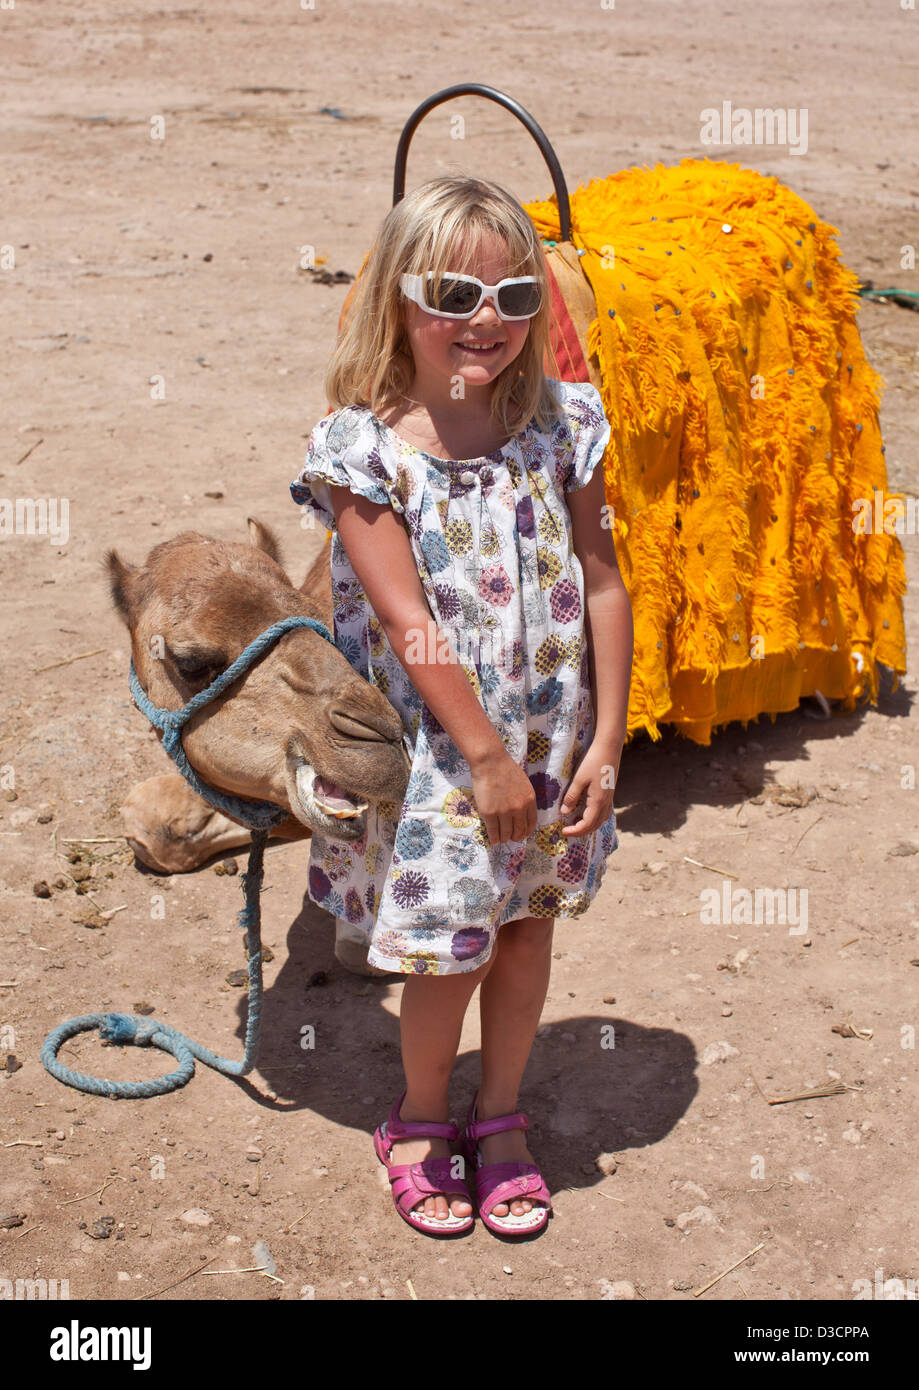 Girl standing by camel, Marrakech, Morocco Stock Photo